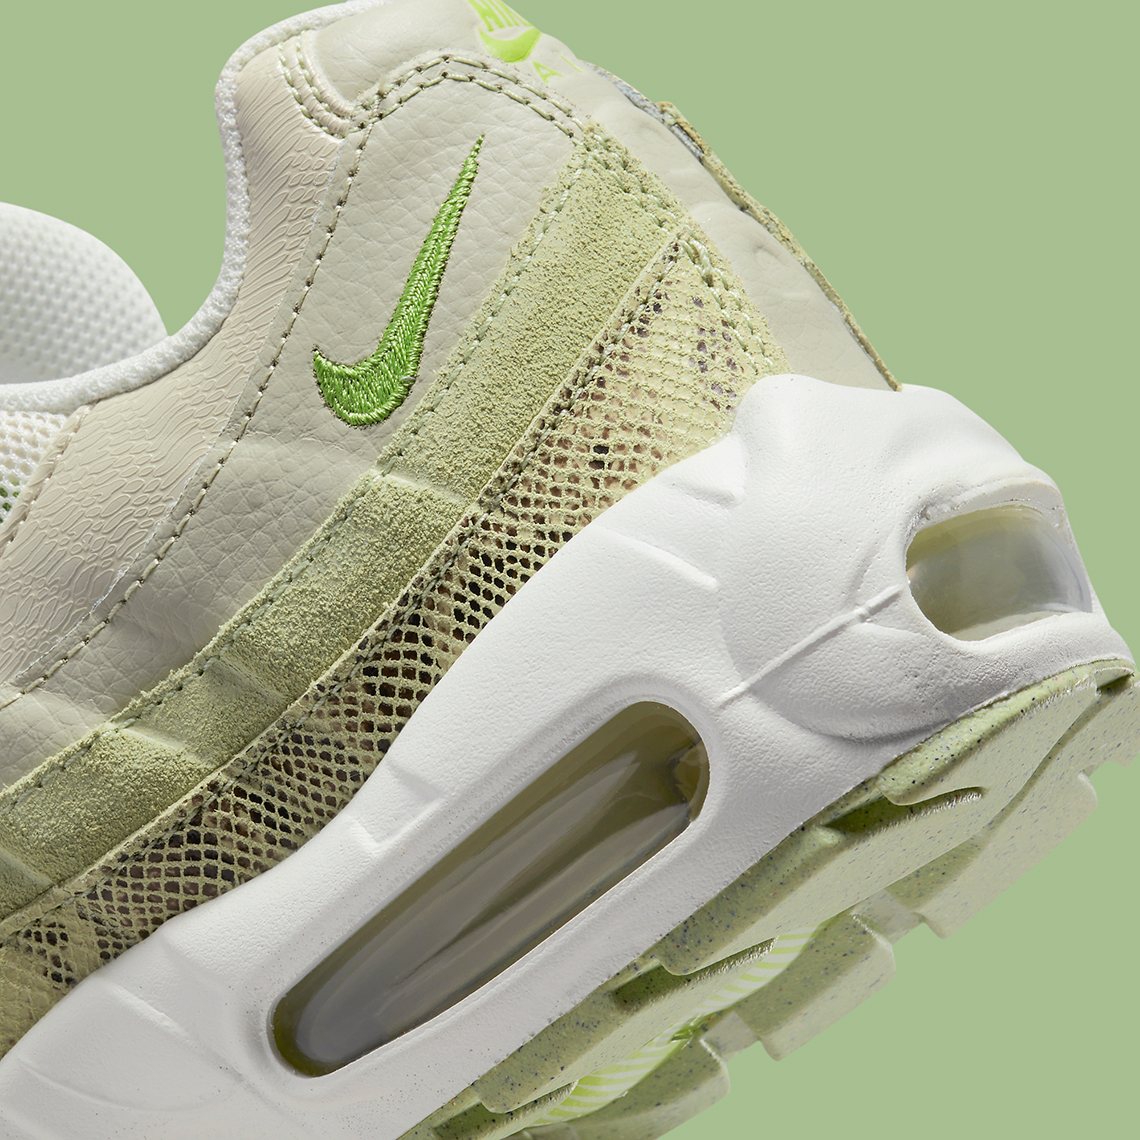 nike air max 95 green snake 2022 release date 1